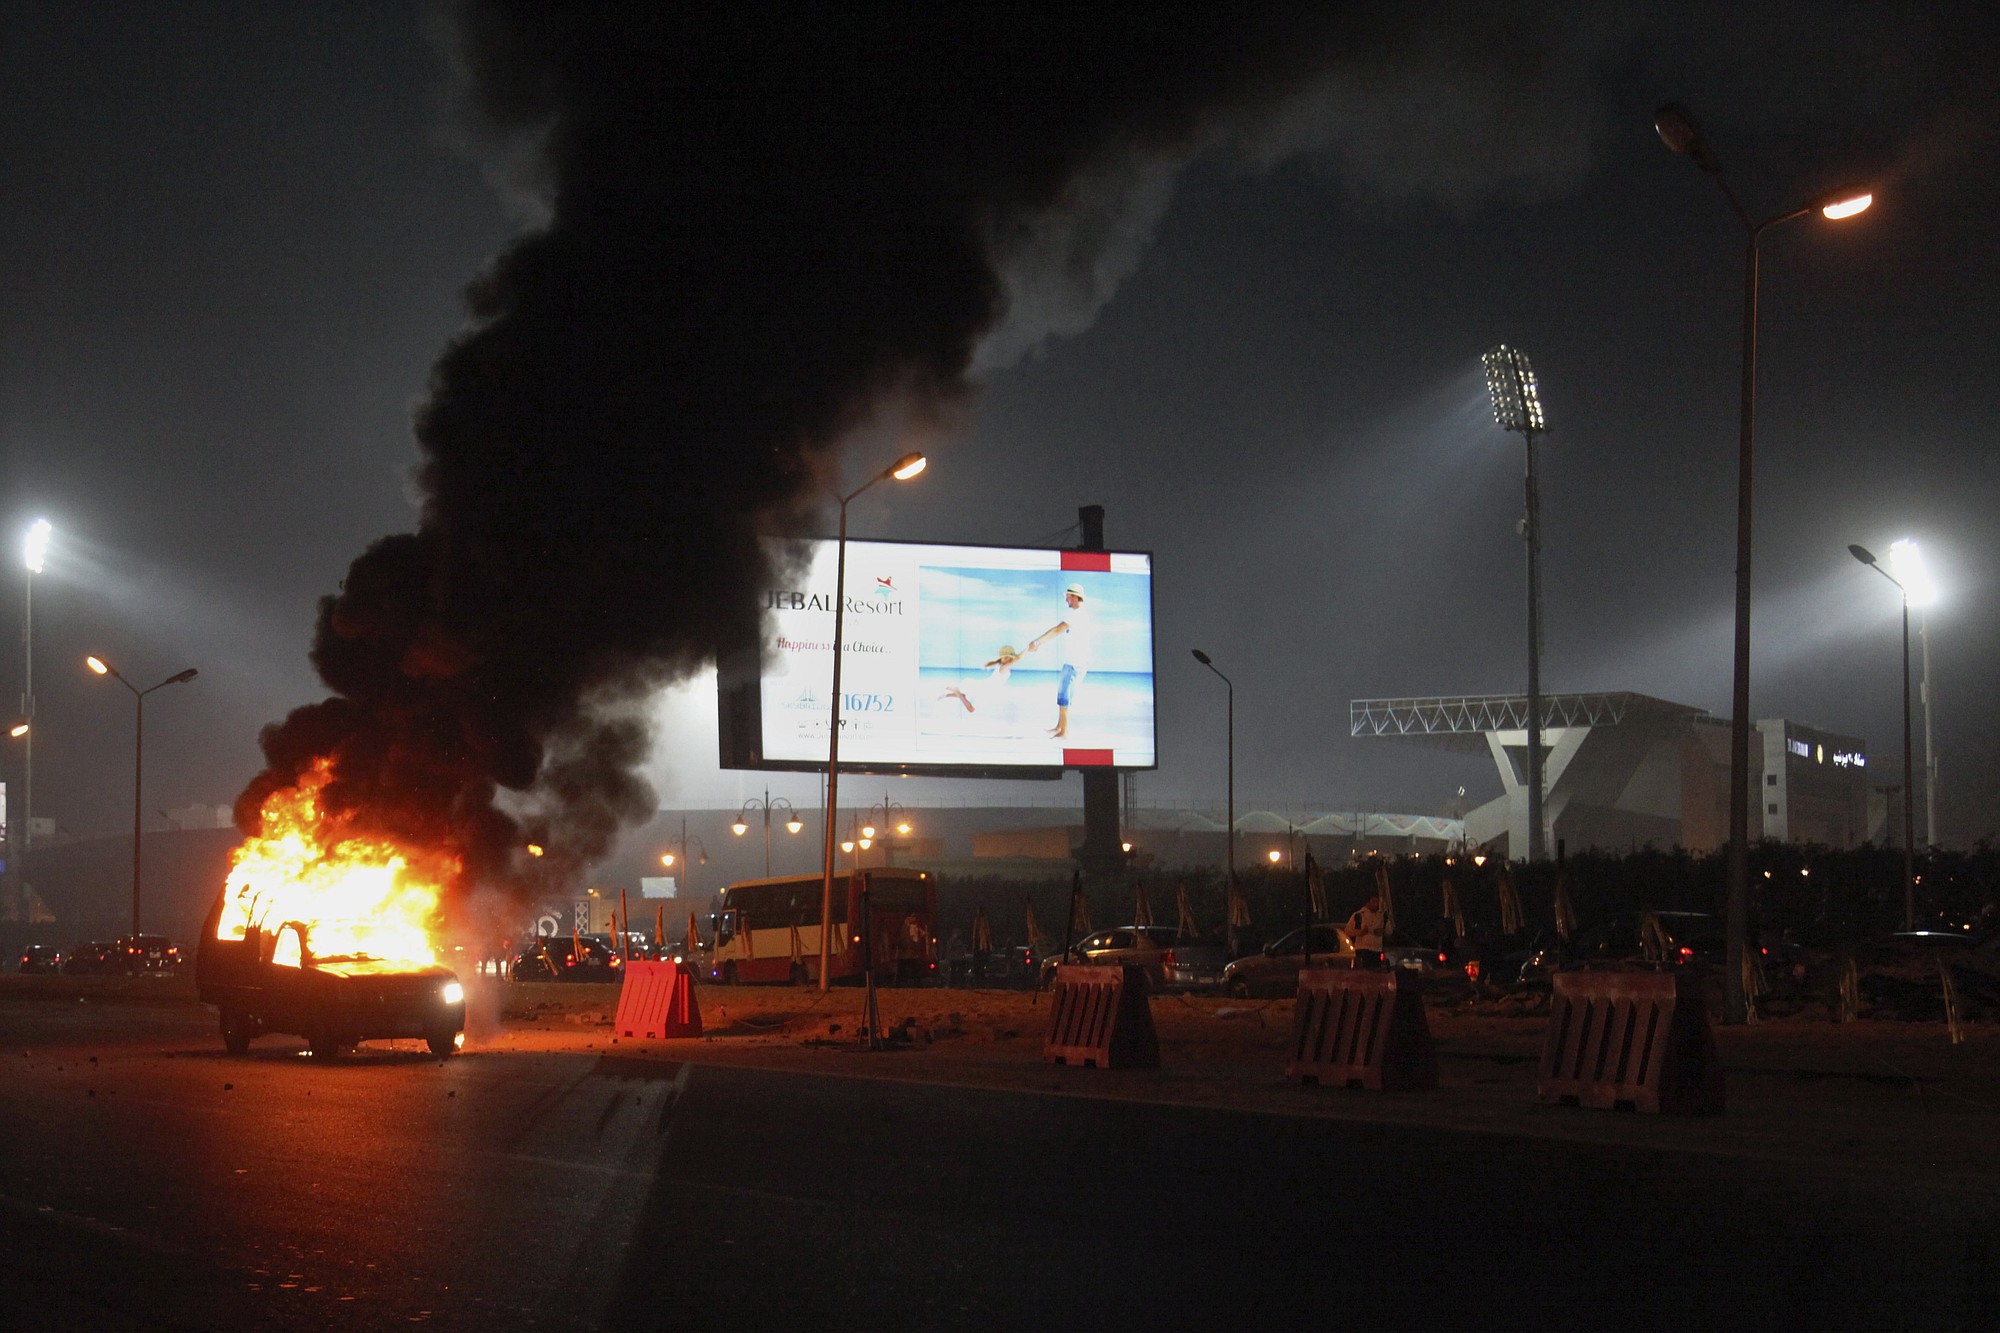 A pickup truck bursts into flames Sunday as a riot breaks out outside of a soccer match between Egyptian Premier League clubs Zamalek and ENPPI at Air Defense Stadium in a suburb east of Cairo, Egypt.